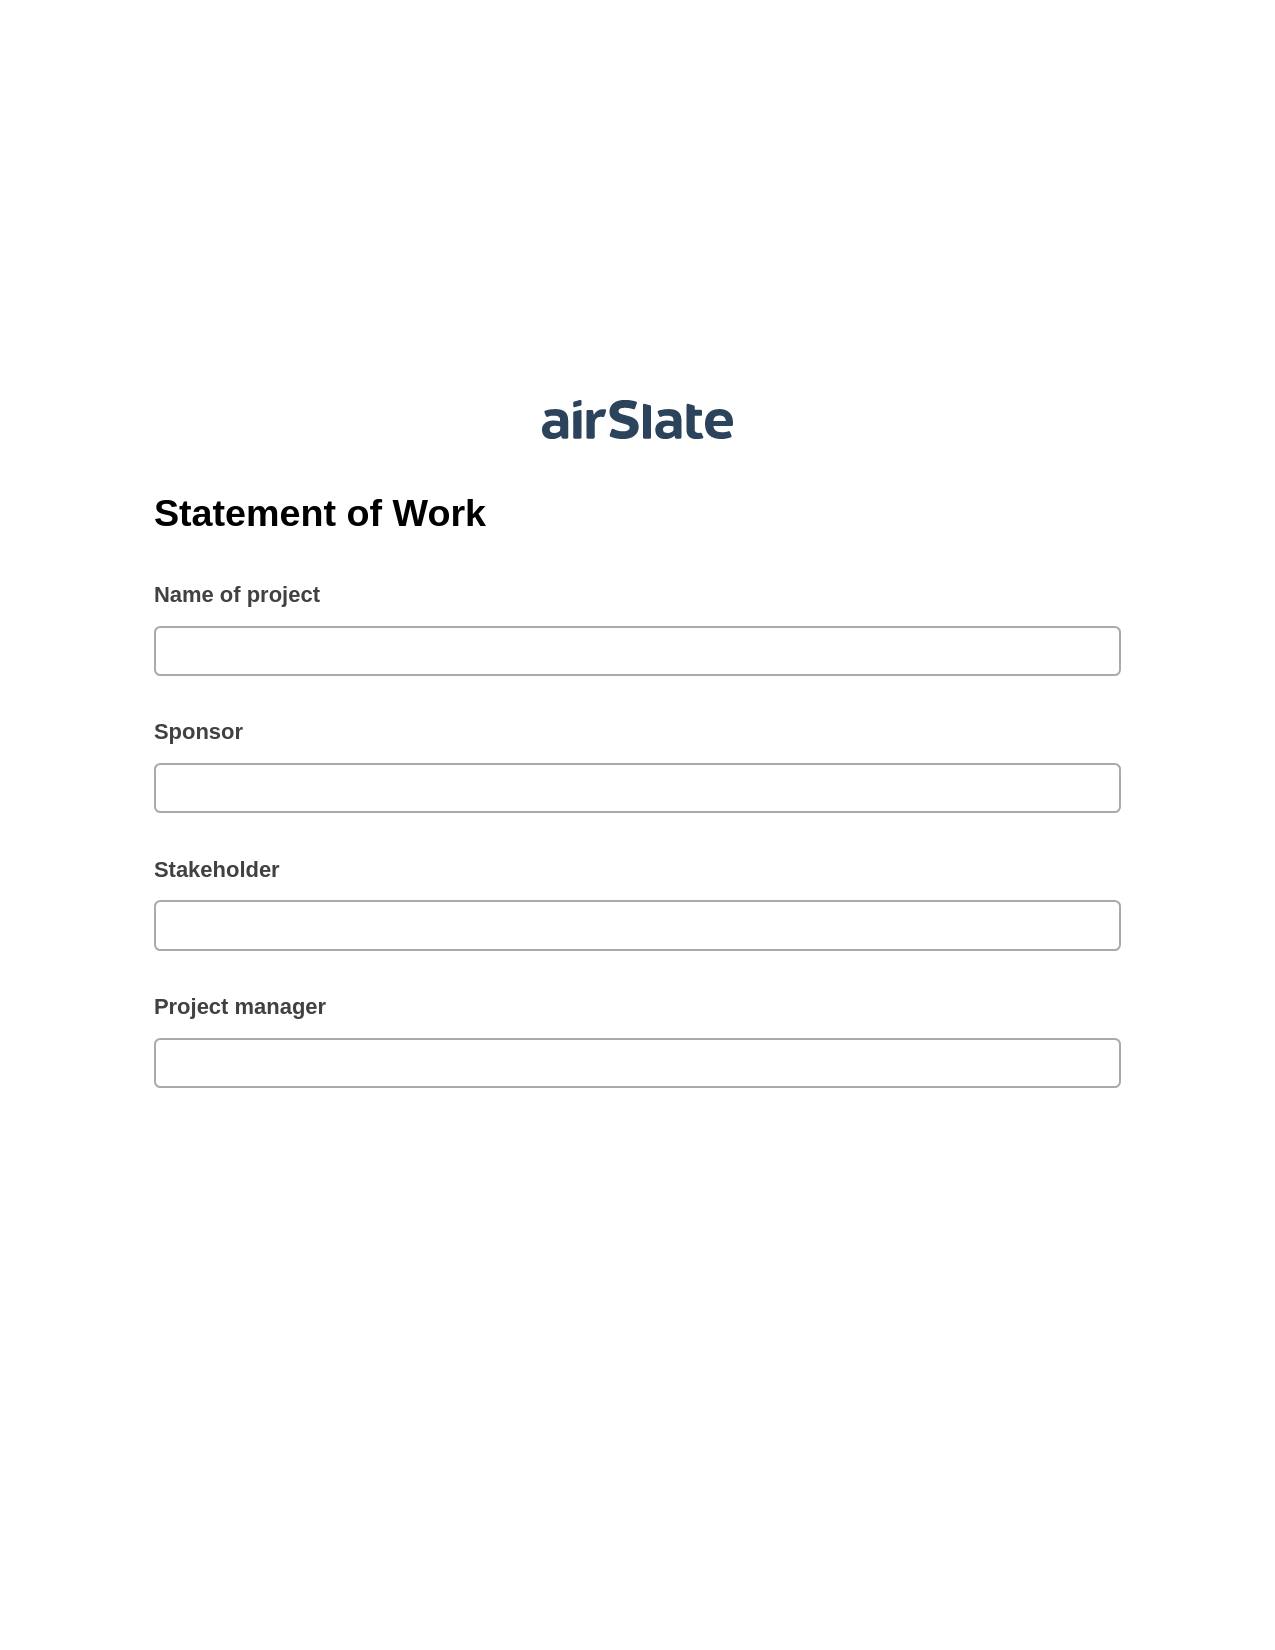 Statement of Work Pre-fill from Excel Spreadsheet Bot, Create slate bot, Archive to SharePoint Folder Bot